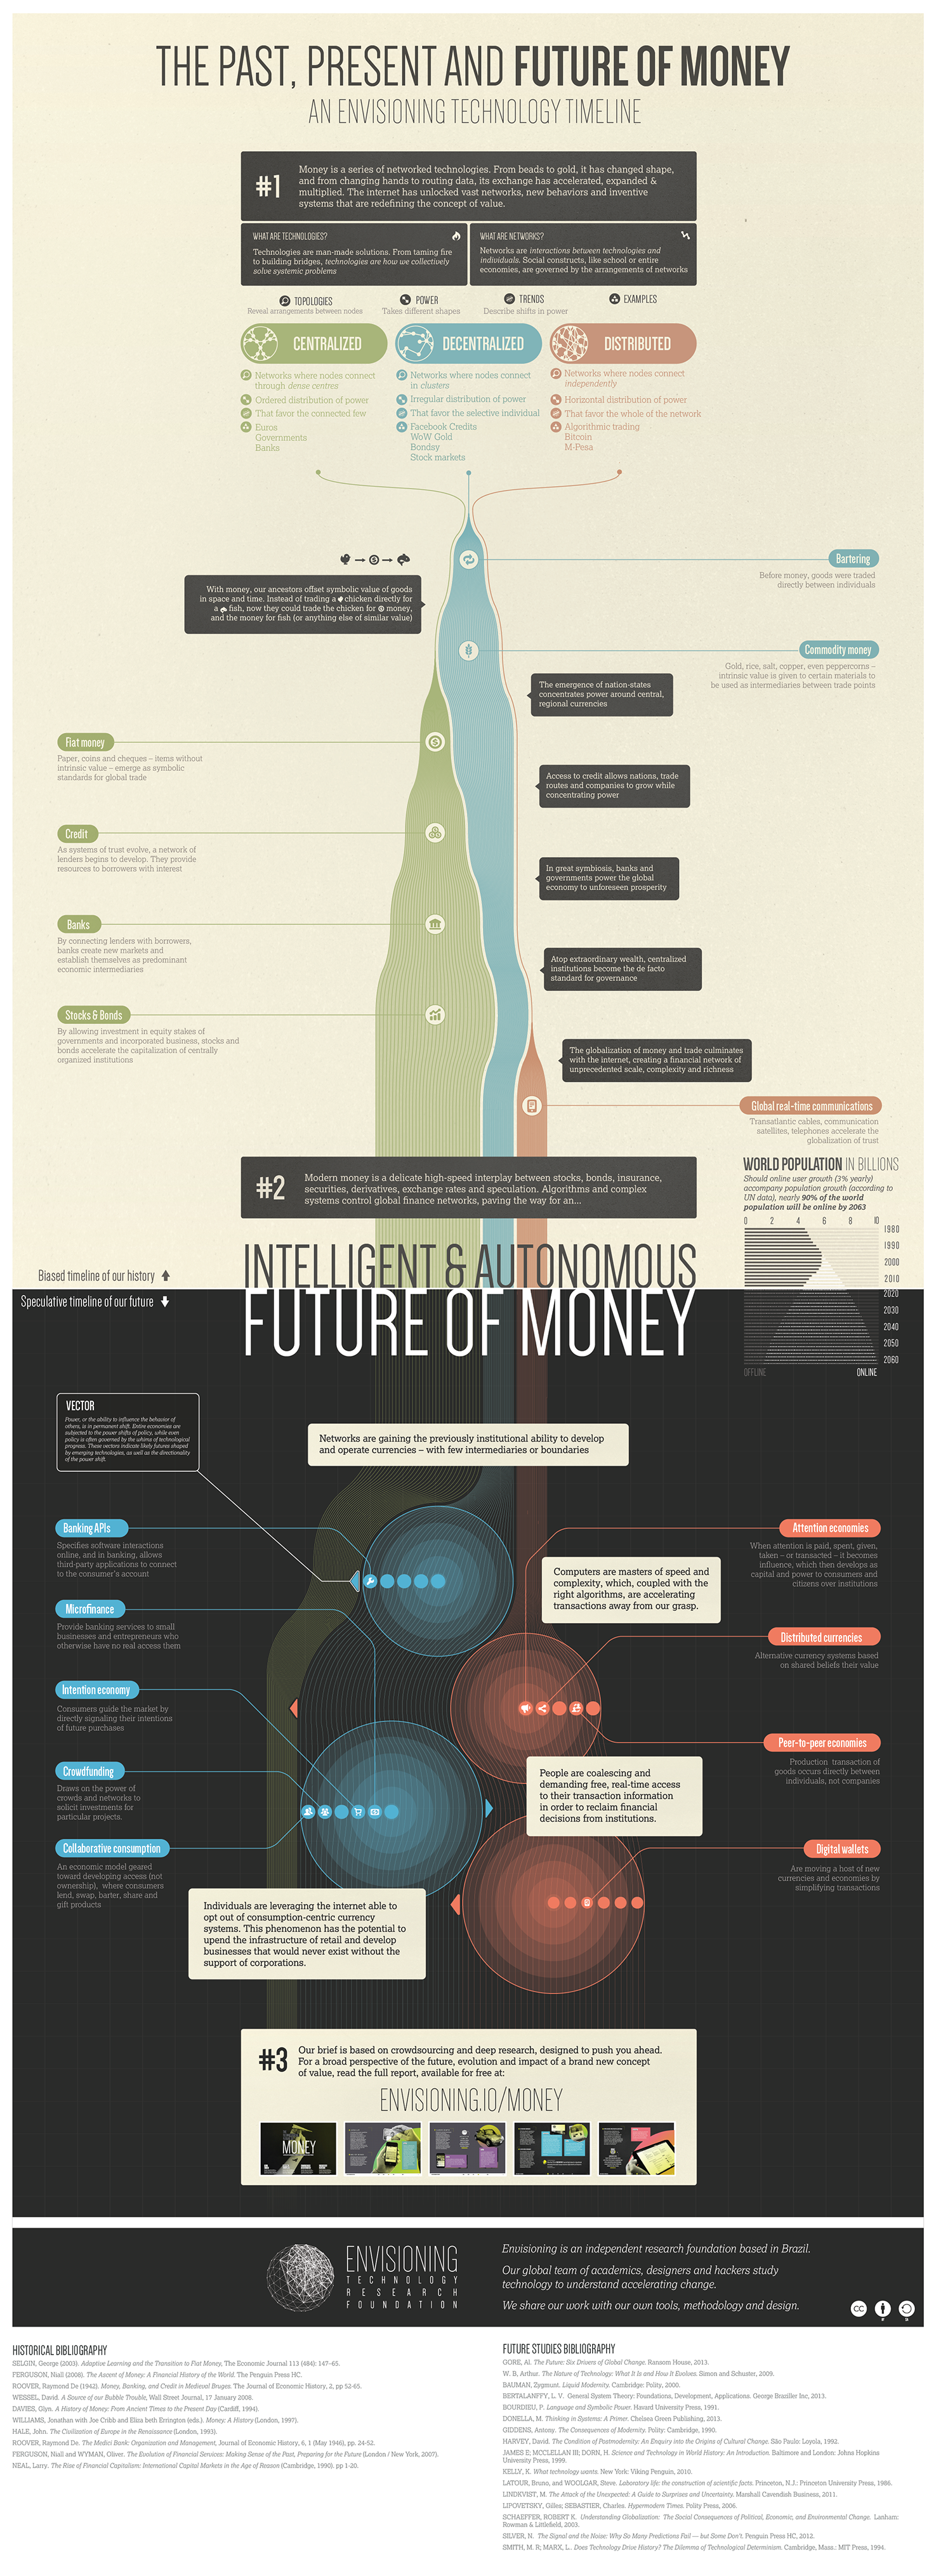 The Future of Money Infographic